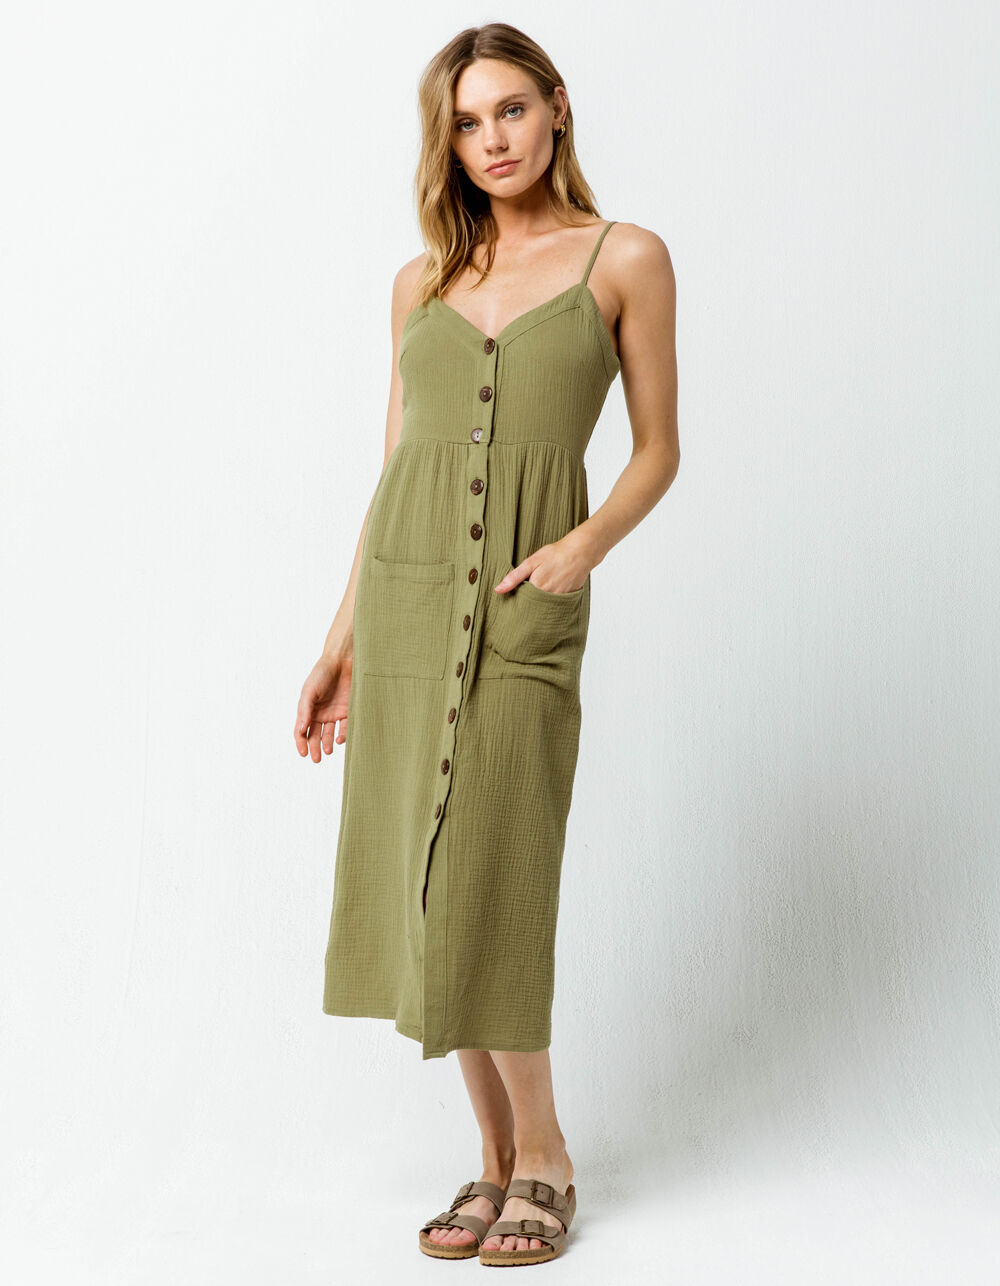 SKY AND SPARROW Button Front Olive Midi Dress - OLIVE | Tillys